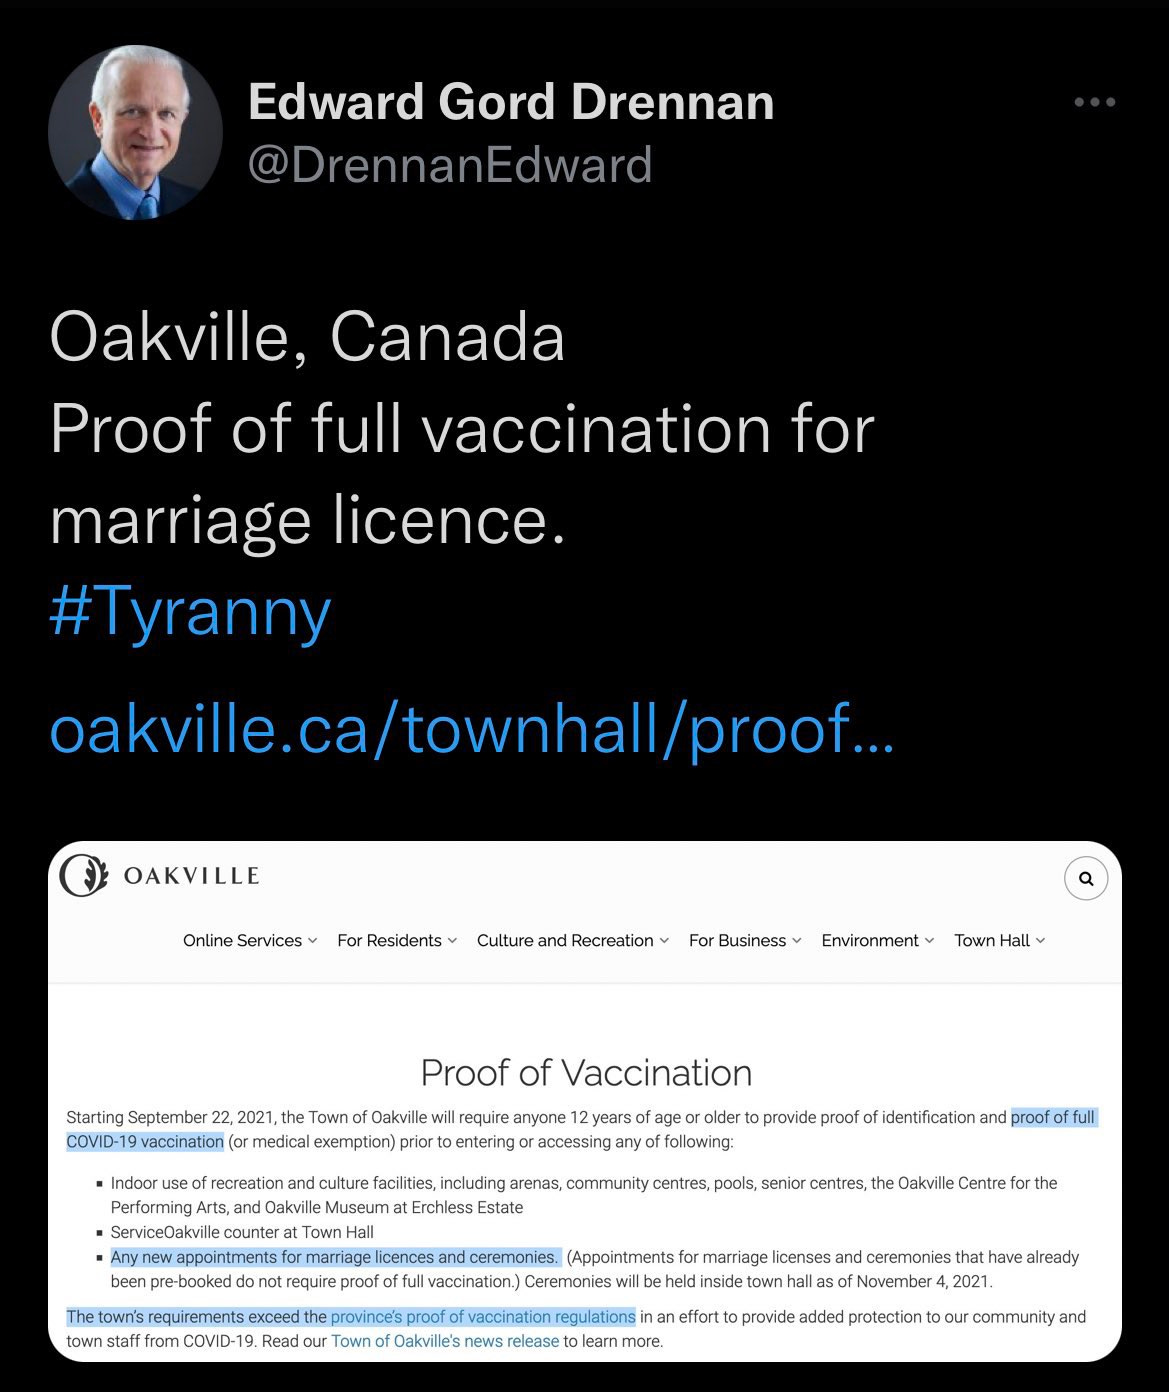 Oakville, Canada, requiring proof of vaccination to apply for a marriage license